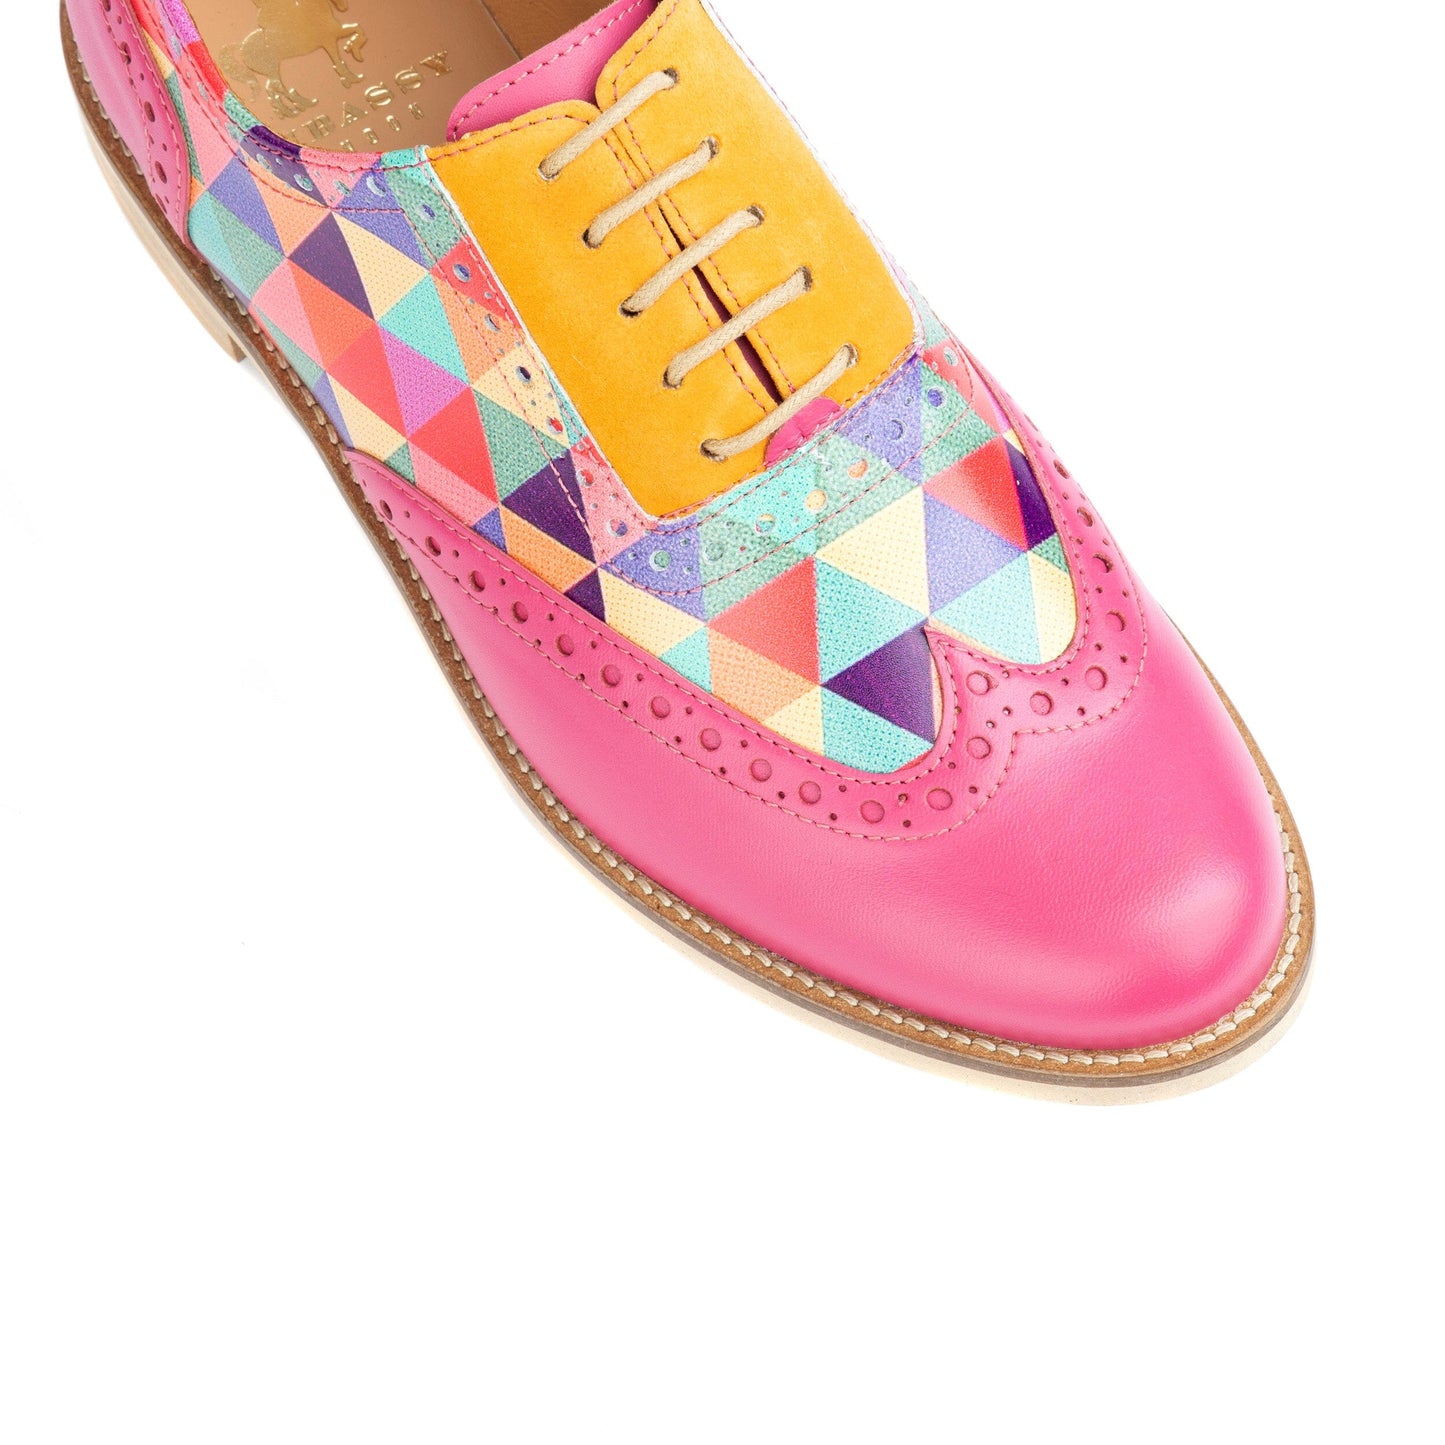 Vivienne - Pink & Yellow & Multi Triangle Print Womens Shoes Embassy London 